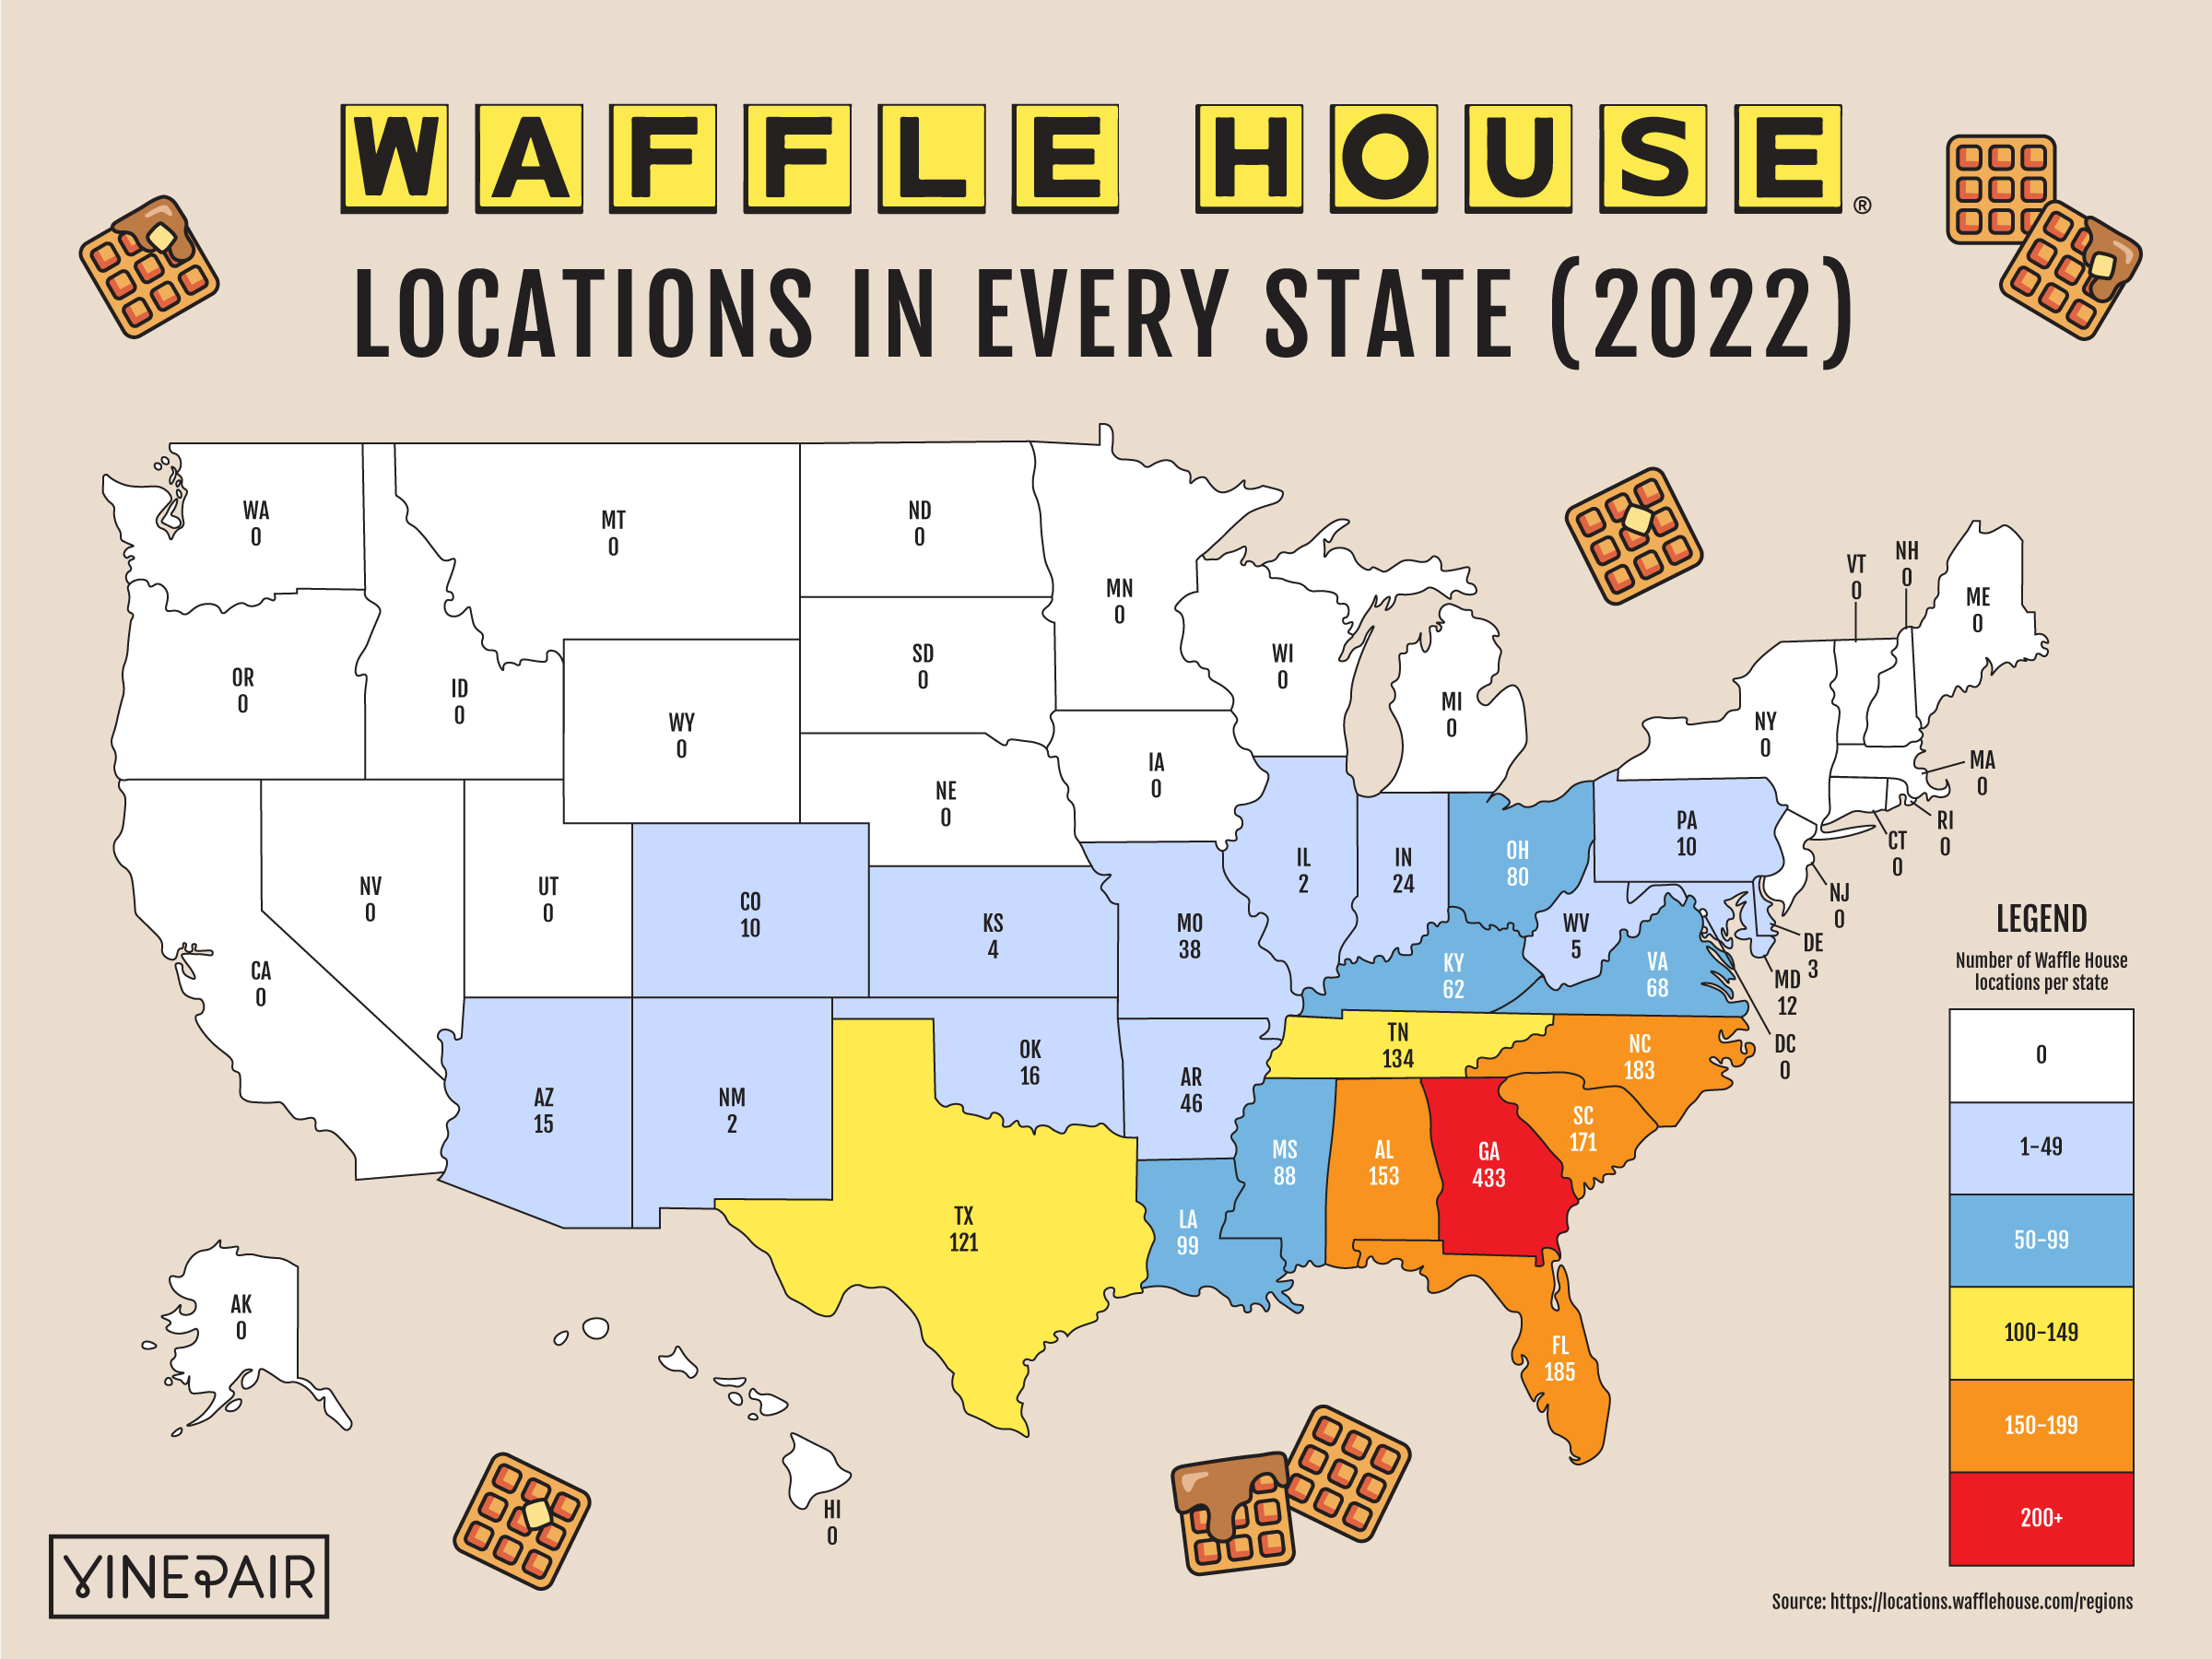 Find out just how many Buffalo Wild Wings locations are in your home state and see how the beloved sports bar compares state to state.